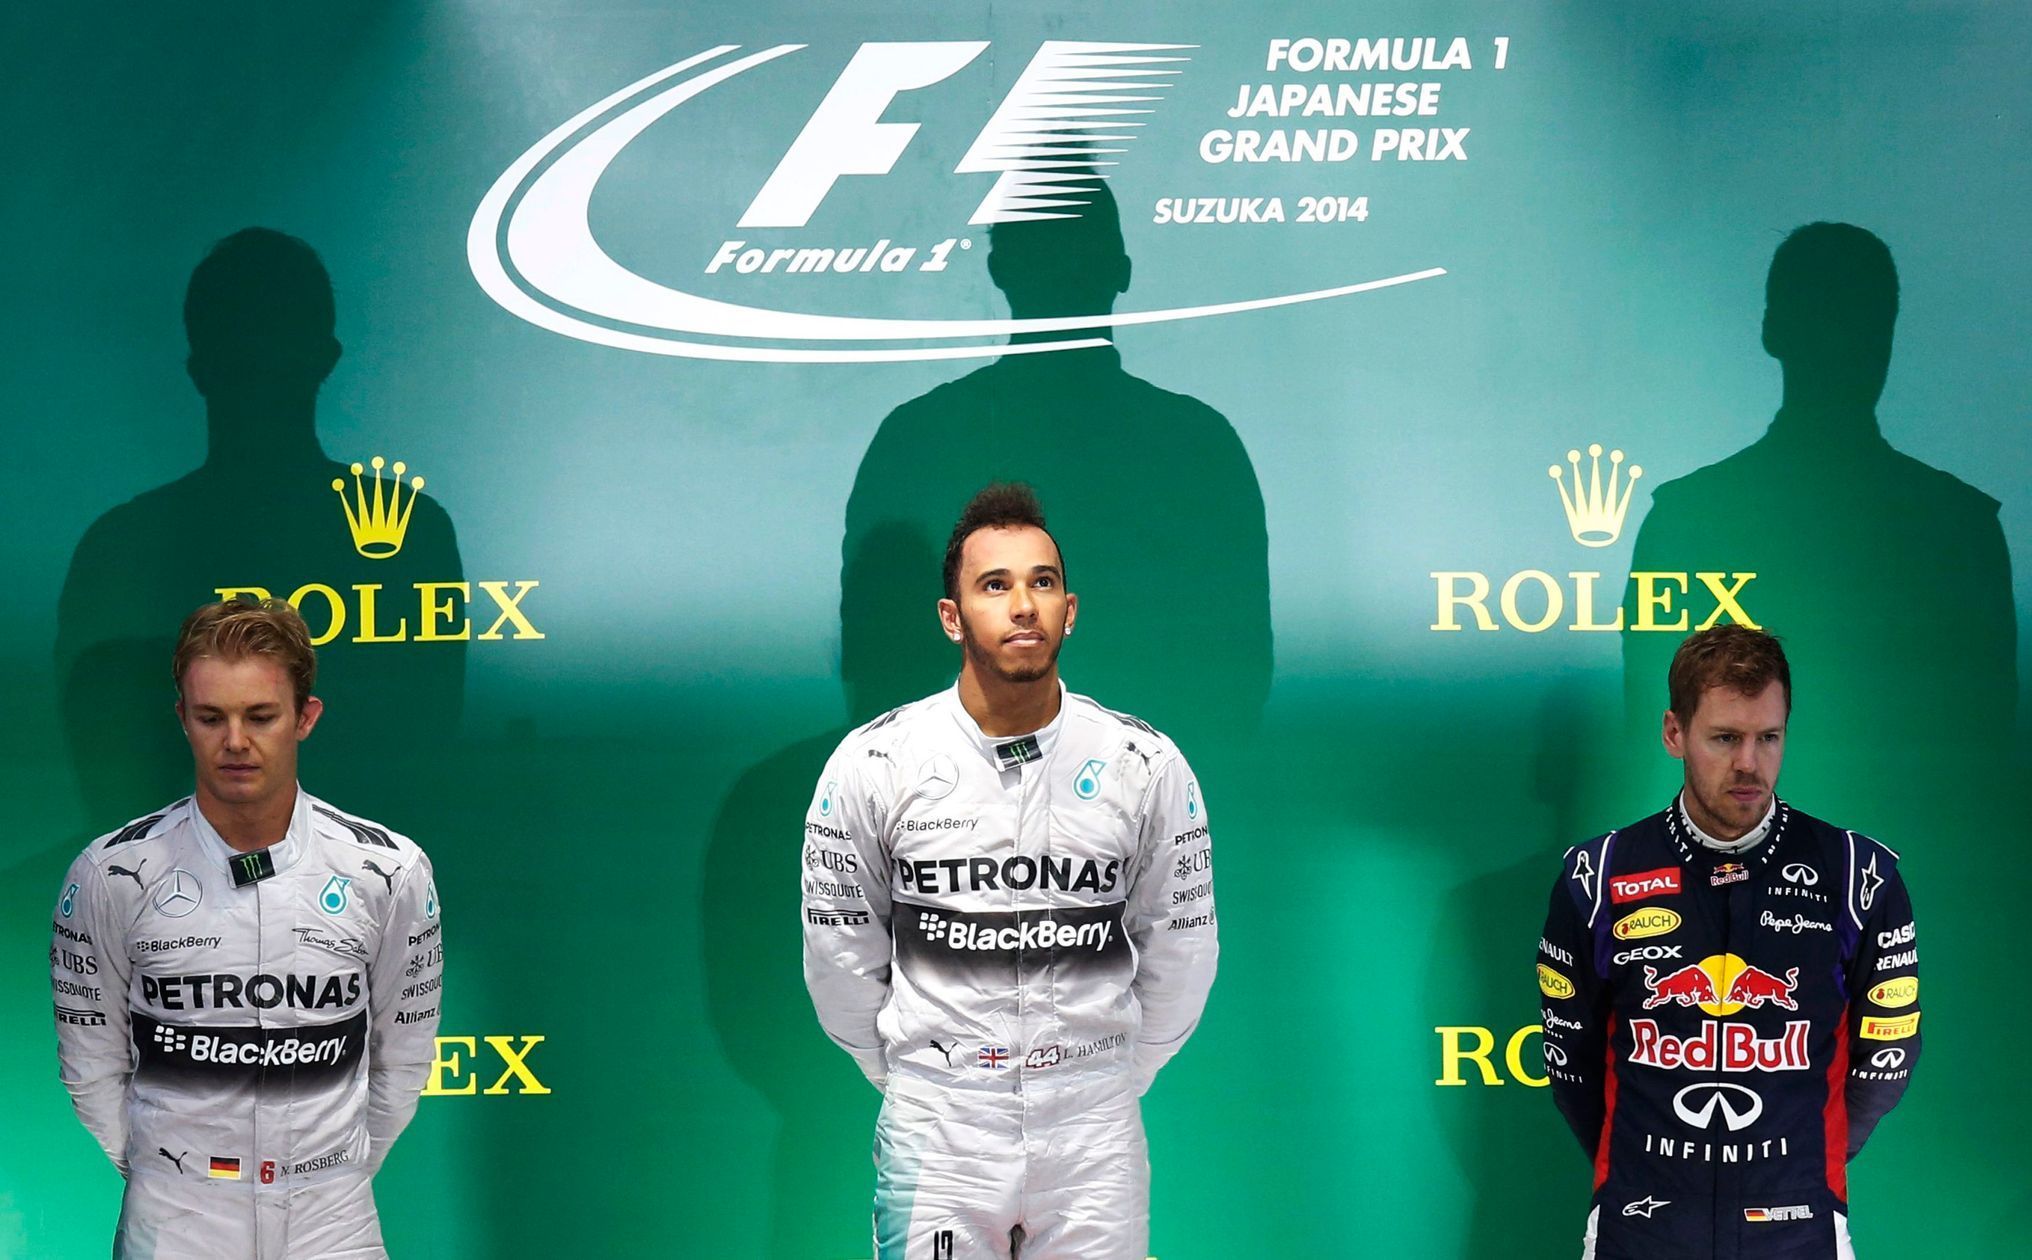 Mercedes Formula One driver Hamilton of Britain waits to receive the trophy after winning the Japanese F1 Grand Prix at the Suzuka Circuit